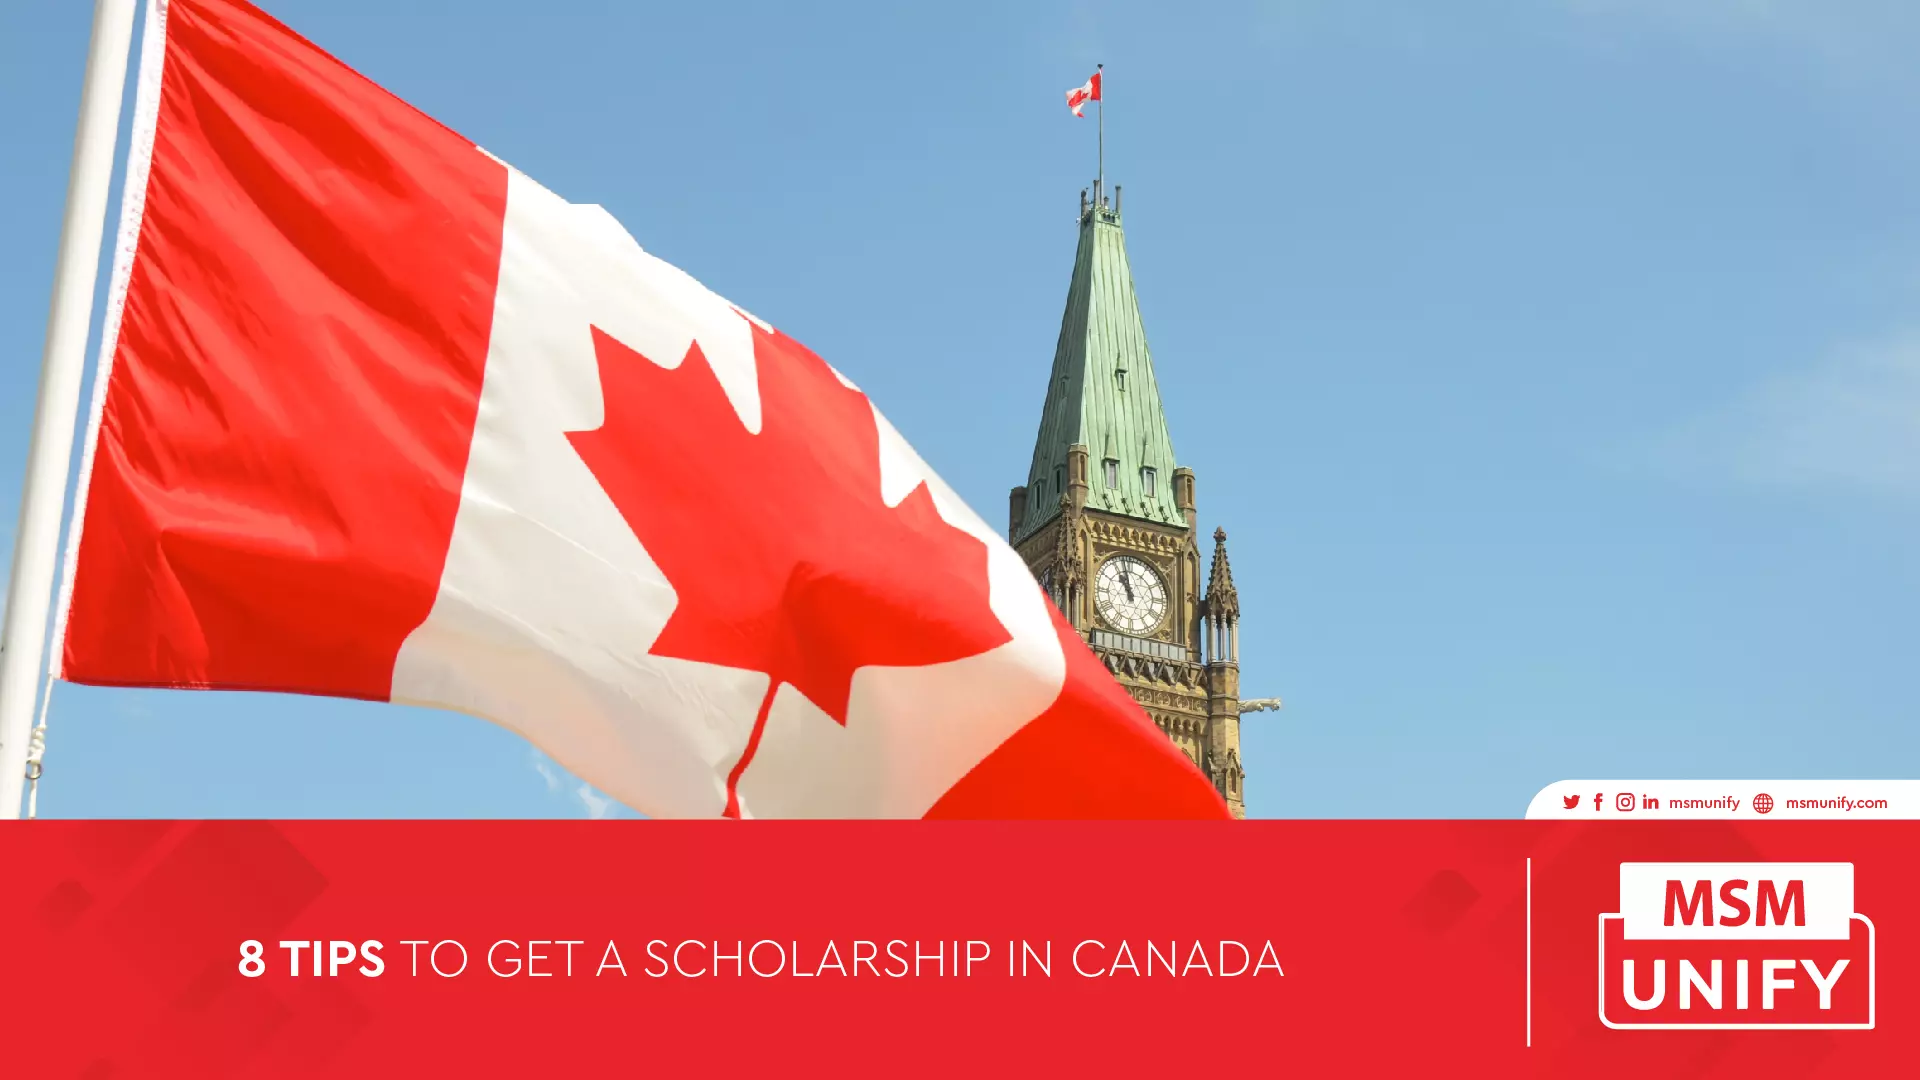 100522 MSM Unify 8 Tips to Get a Scholarship in Canada 01 1